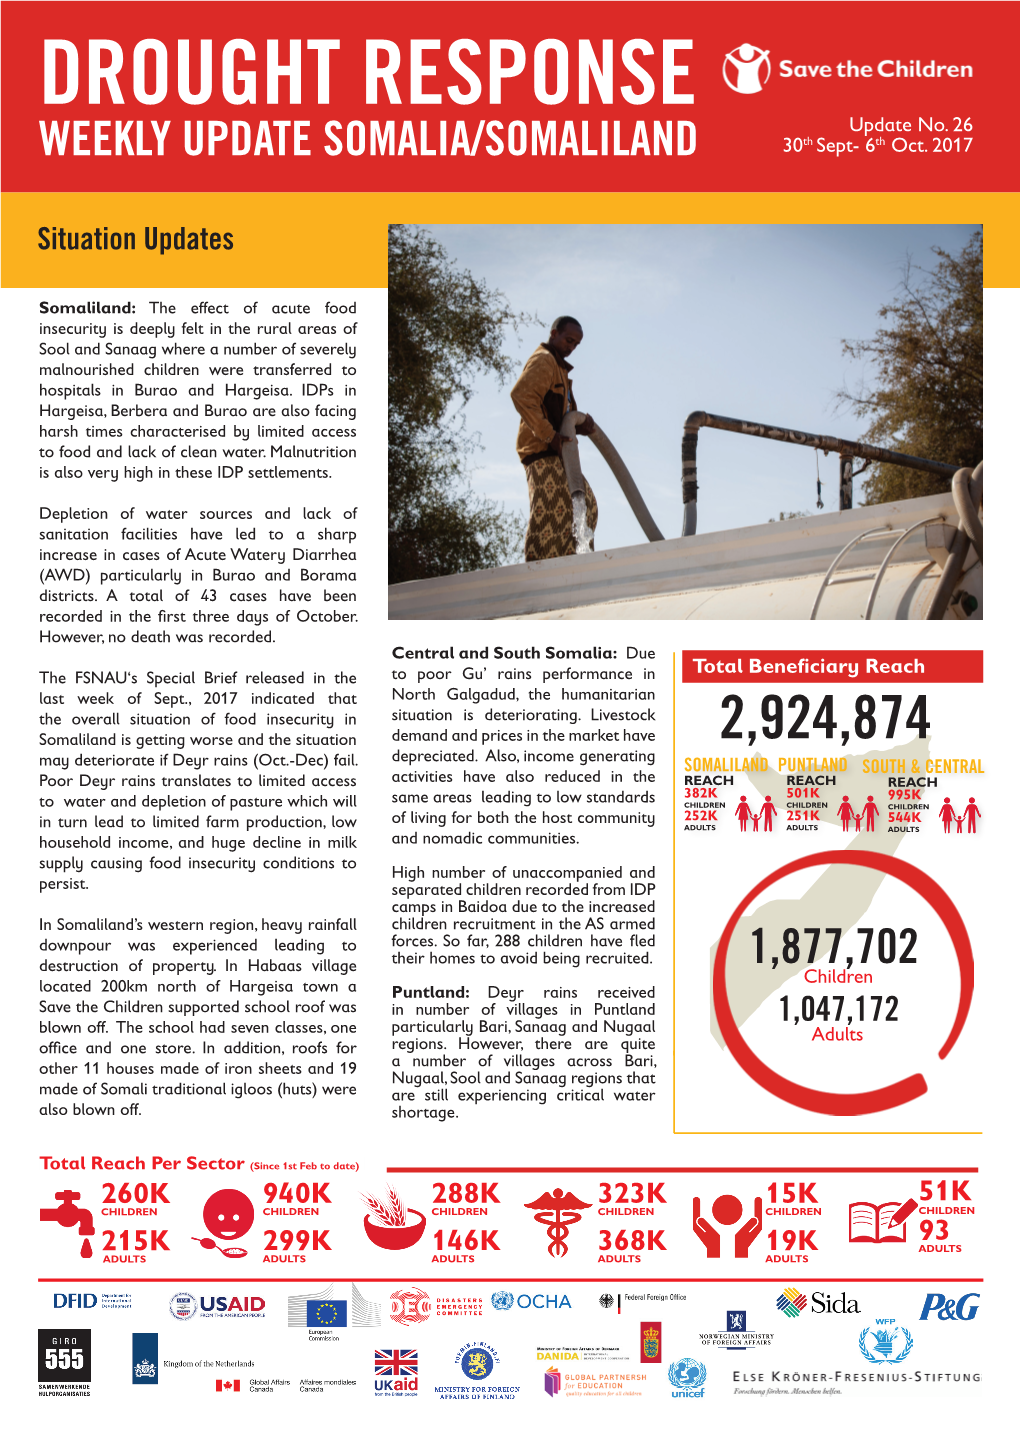 DROUGHT RESPONSE Update No